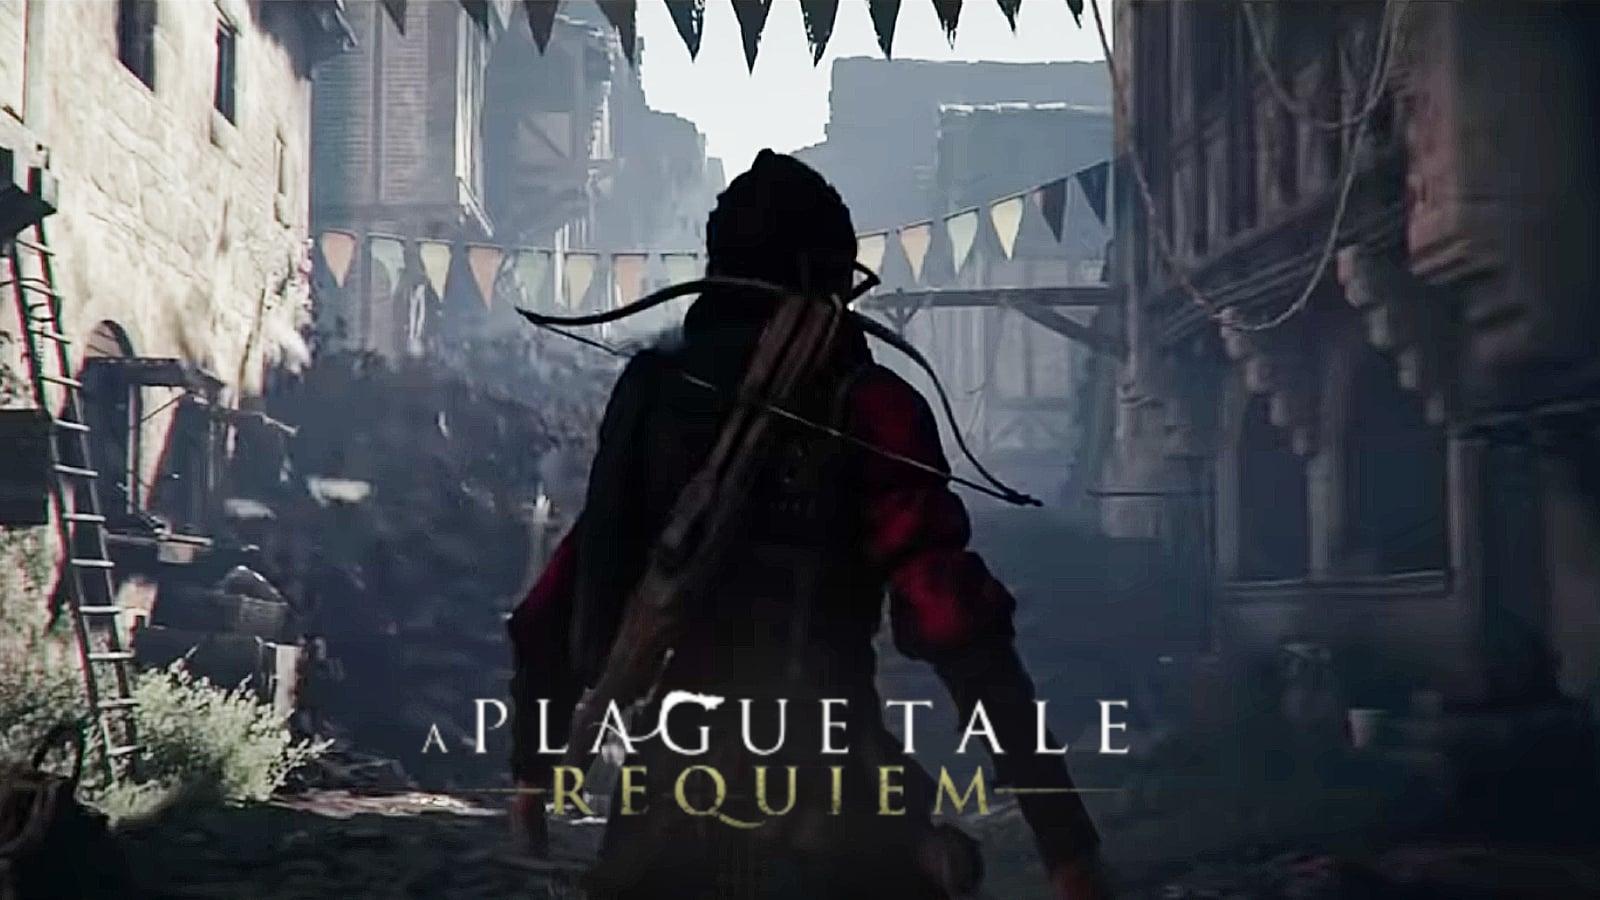 gamers don't die, they respawn — A PLAGUE TALE: REQUIEM